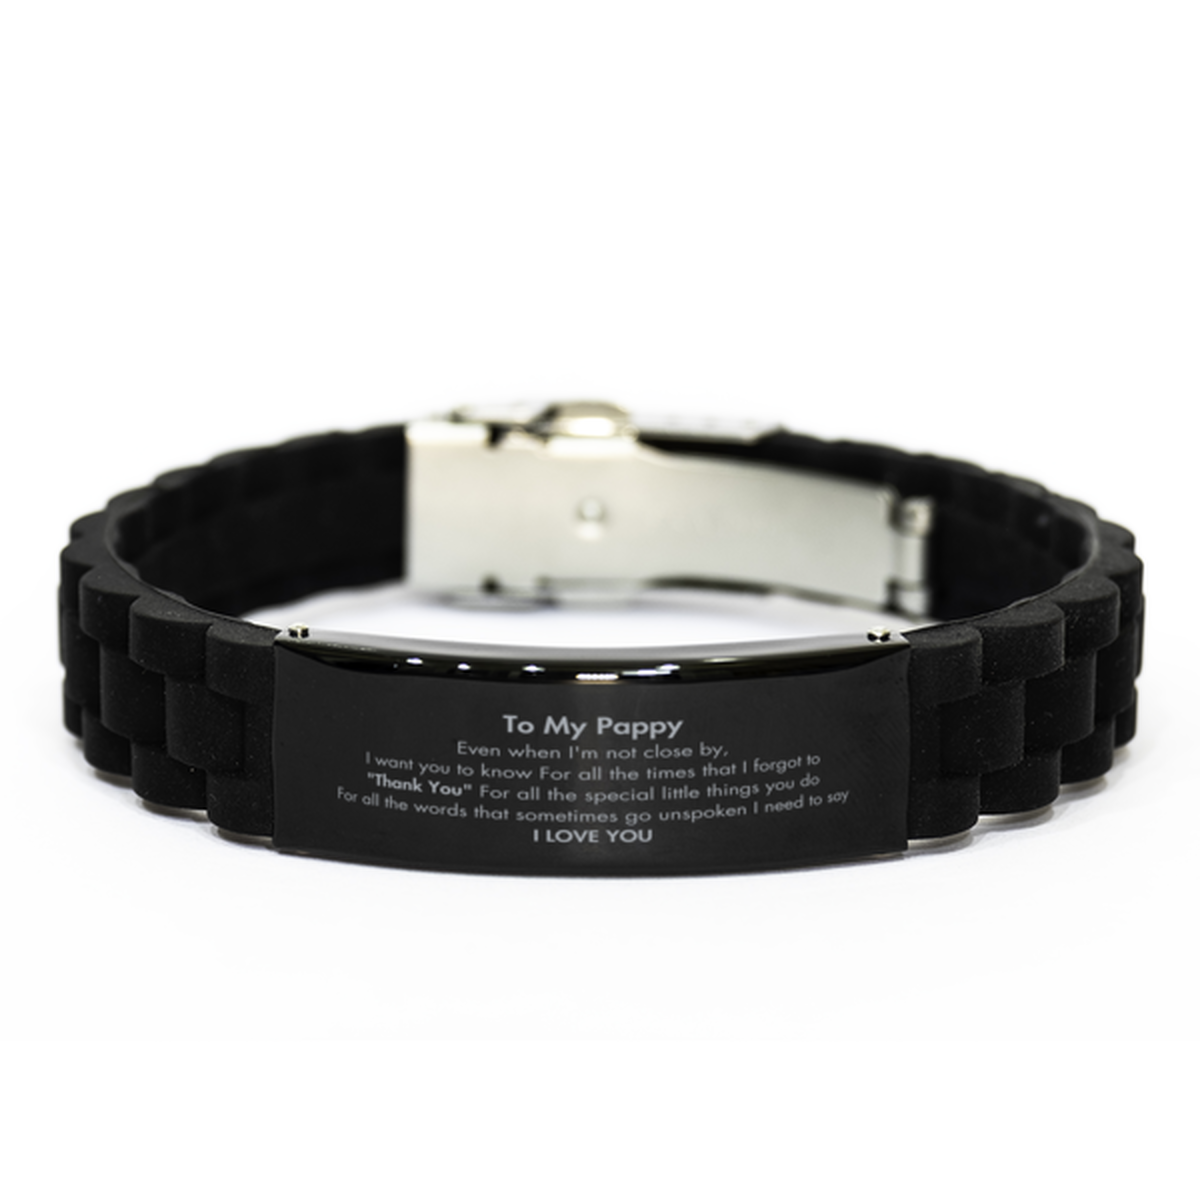 Thank You Gifts for Pappy, Keepsake Black Glidelock Clasp Bracelet Gifts for Pappy Birthday Mother's day Father's Day Pappy For all the words That sometimes go unspoken I need to say I LOVE YOU